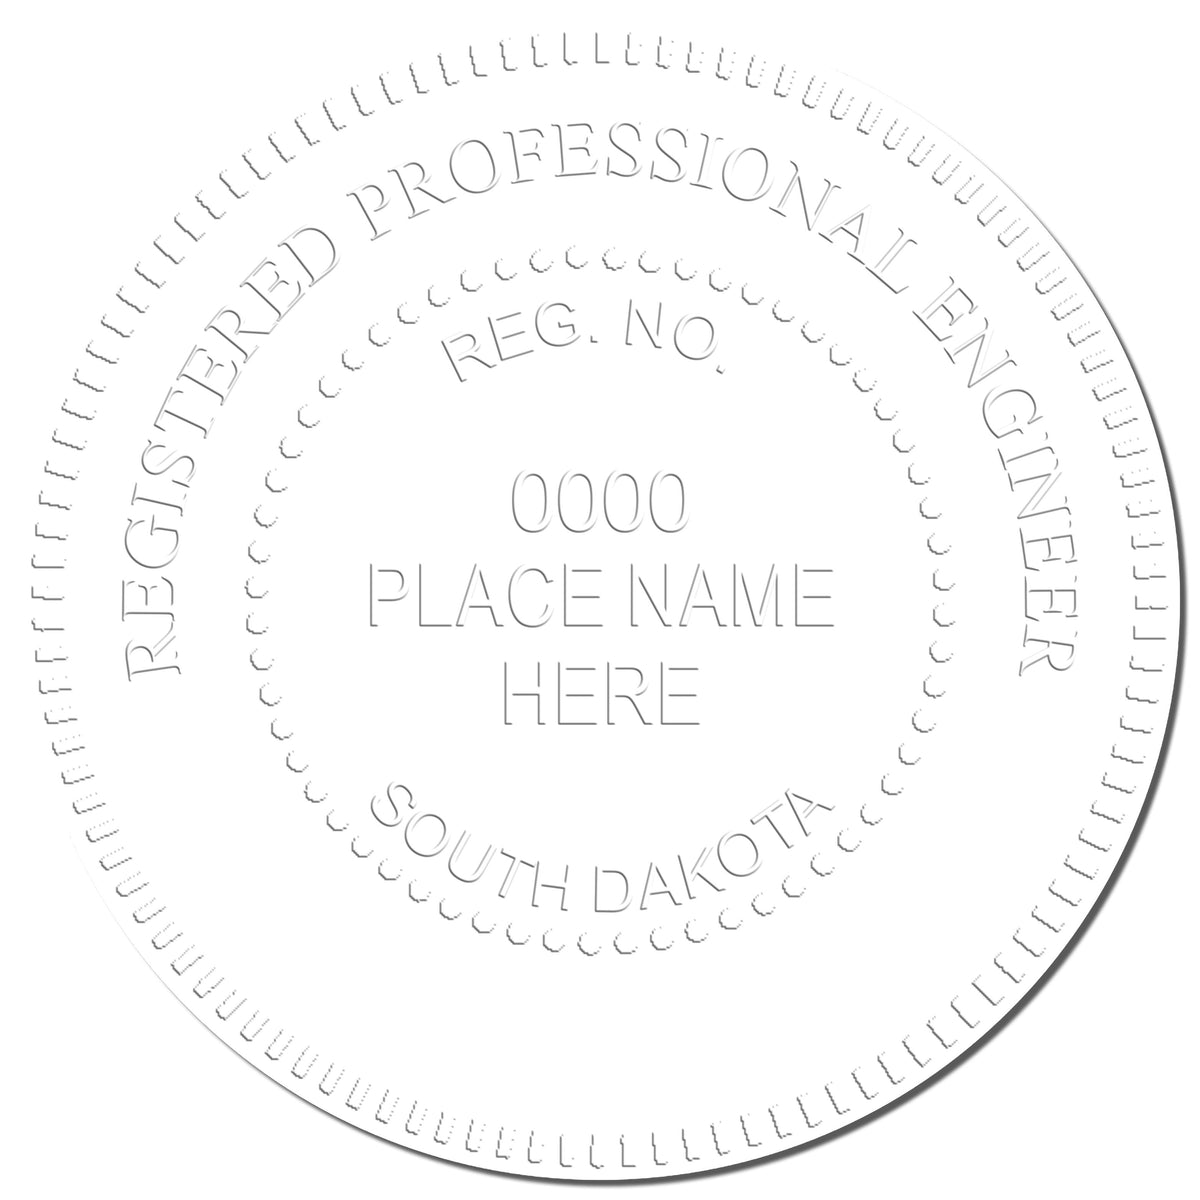 This paper is stamped with a sample imprint of the Heavy Duty Cast Iron South Dakota Engineer Seal Embosser, signifying its quality and reliability.